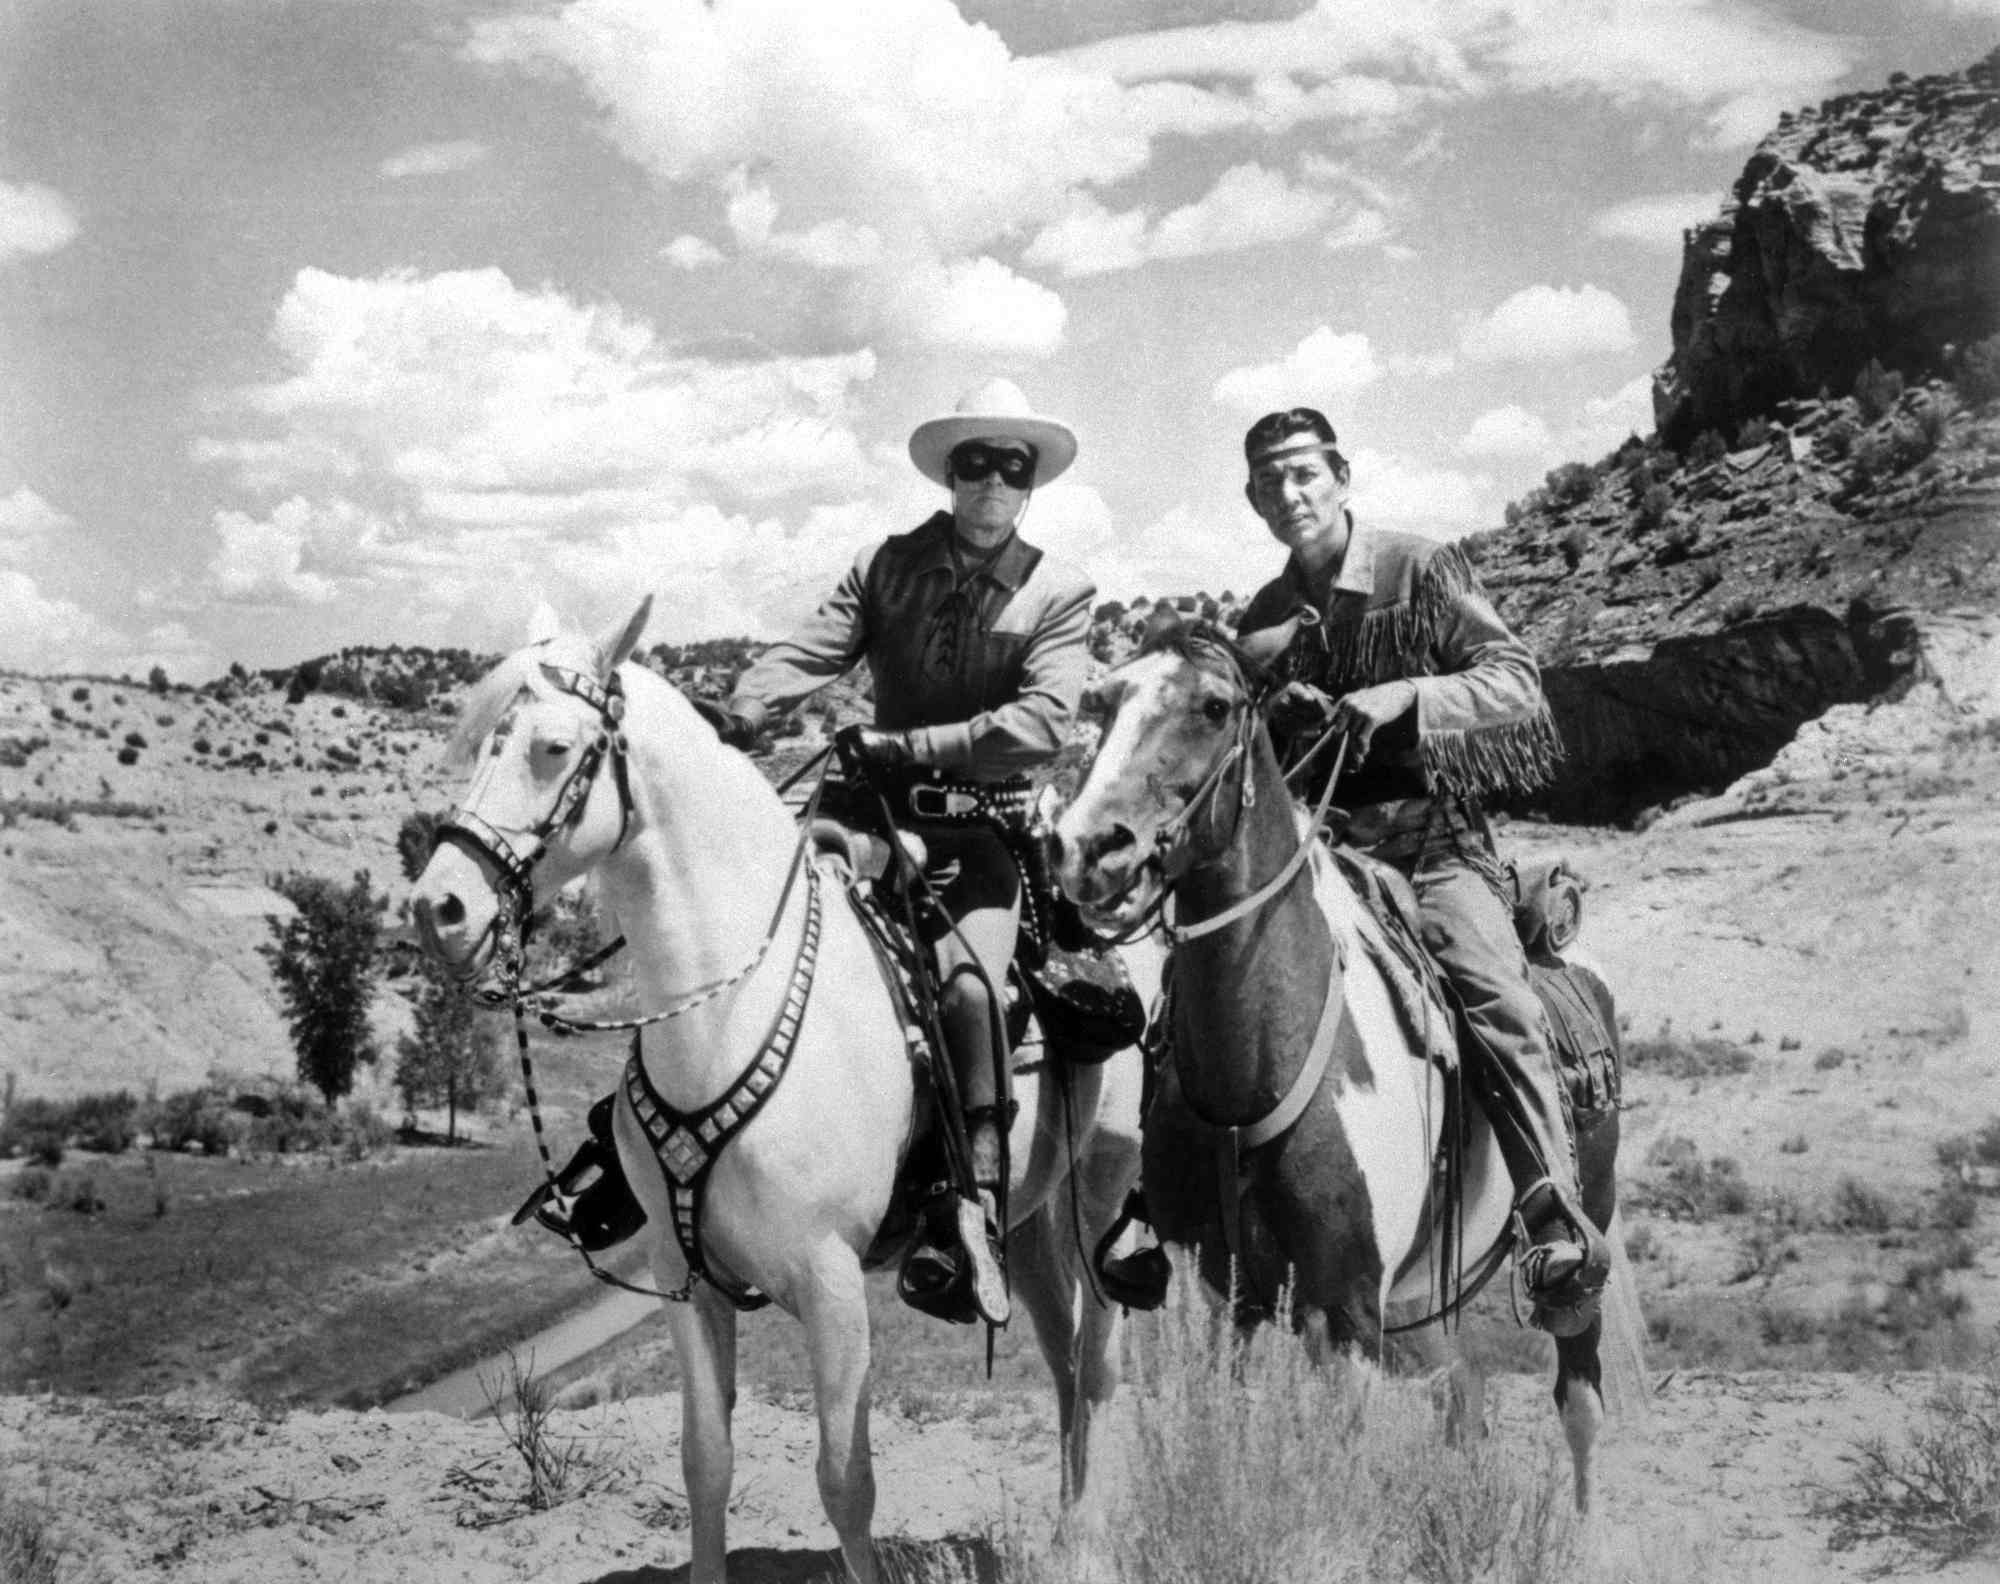 Western television shows 'The Lone Ranger' Clayton Moore as The Lone Ranger and Jay Silverheels as Tonto riding horses in the desert.